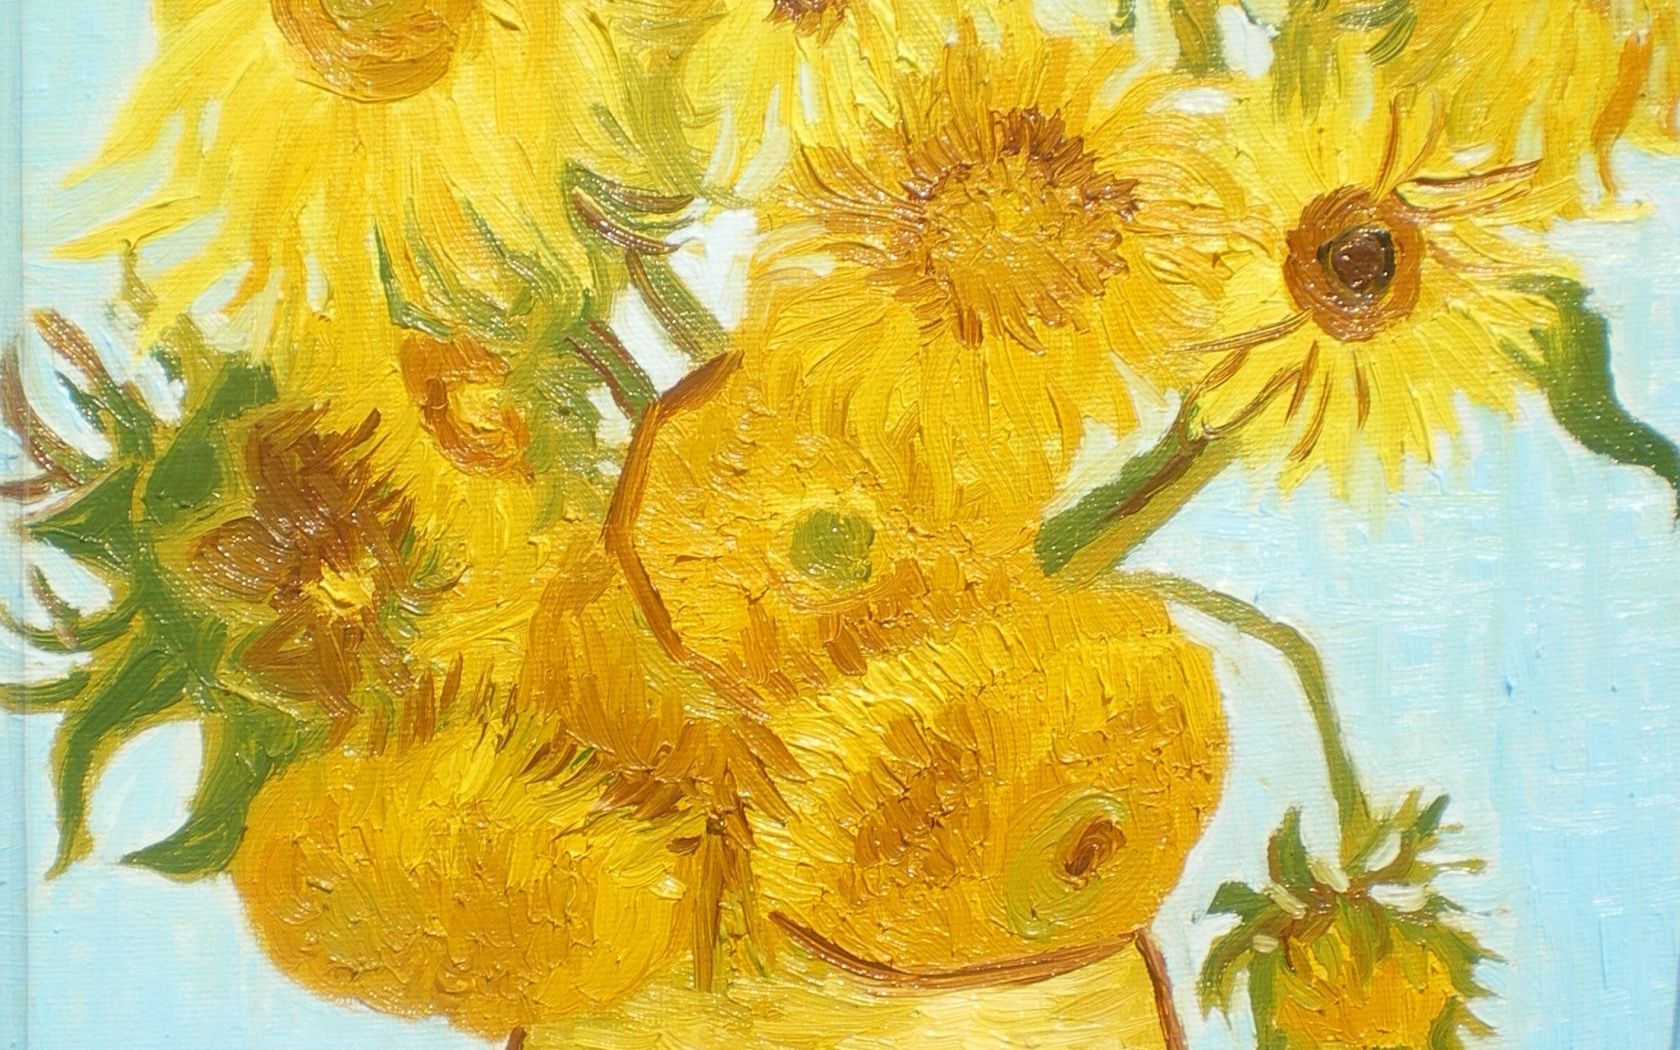 Free download Van Gogh Sunflowers Wallpaper Van goghs sunflowers by [2207x2950] for your Desktop, Mobile & Tablet. Explore Van Gogh Sunflowers Wallpaper. Van Gogh Sunflowers Wallpaper, Van Gogh Wallpaper